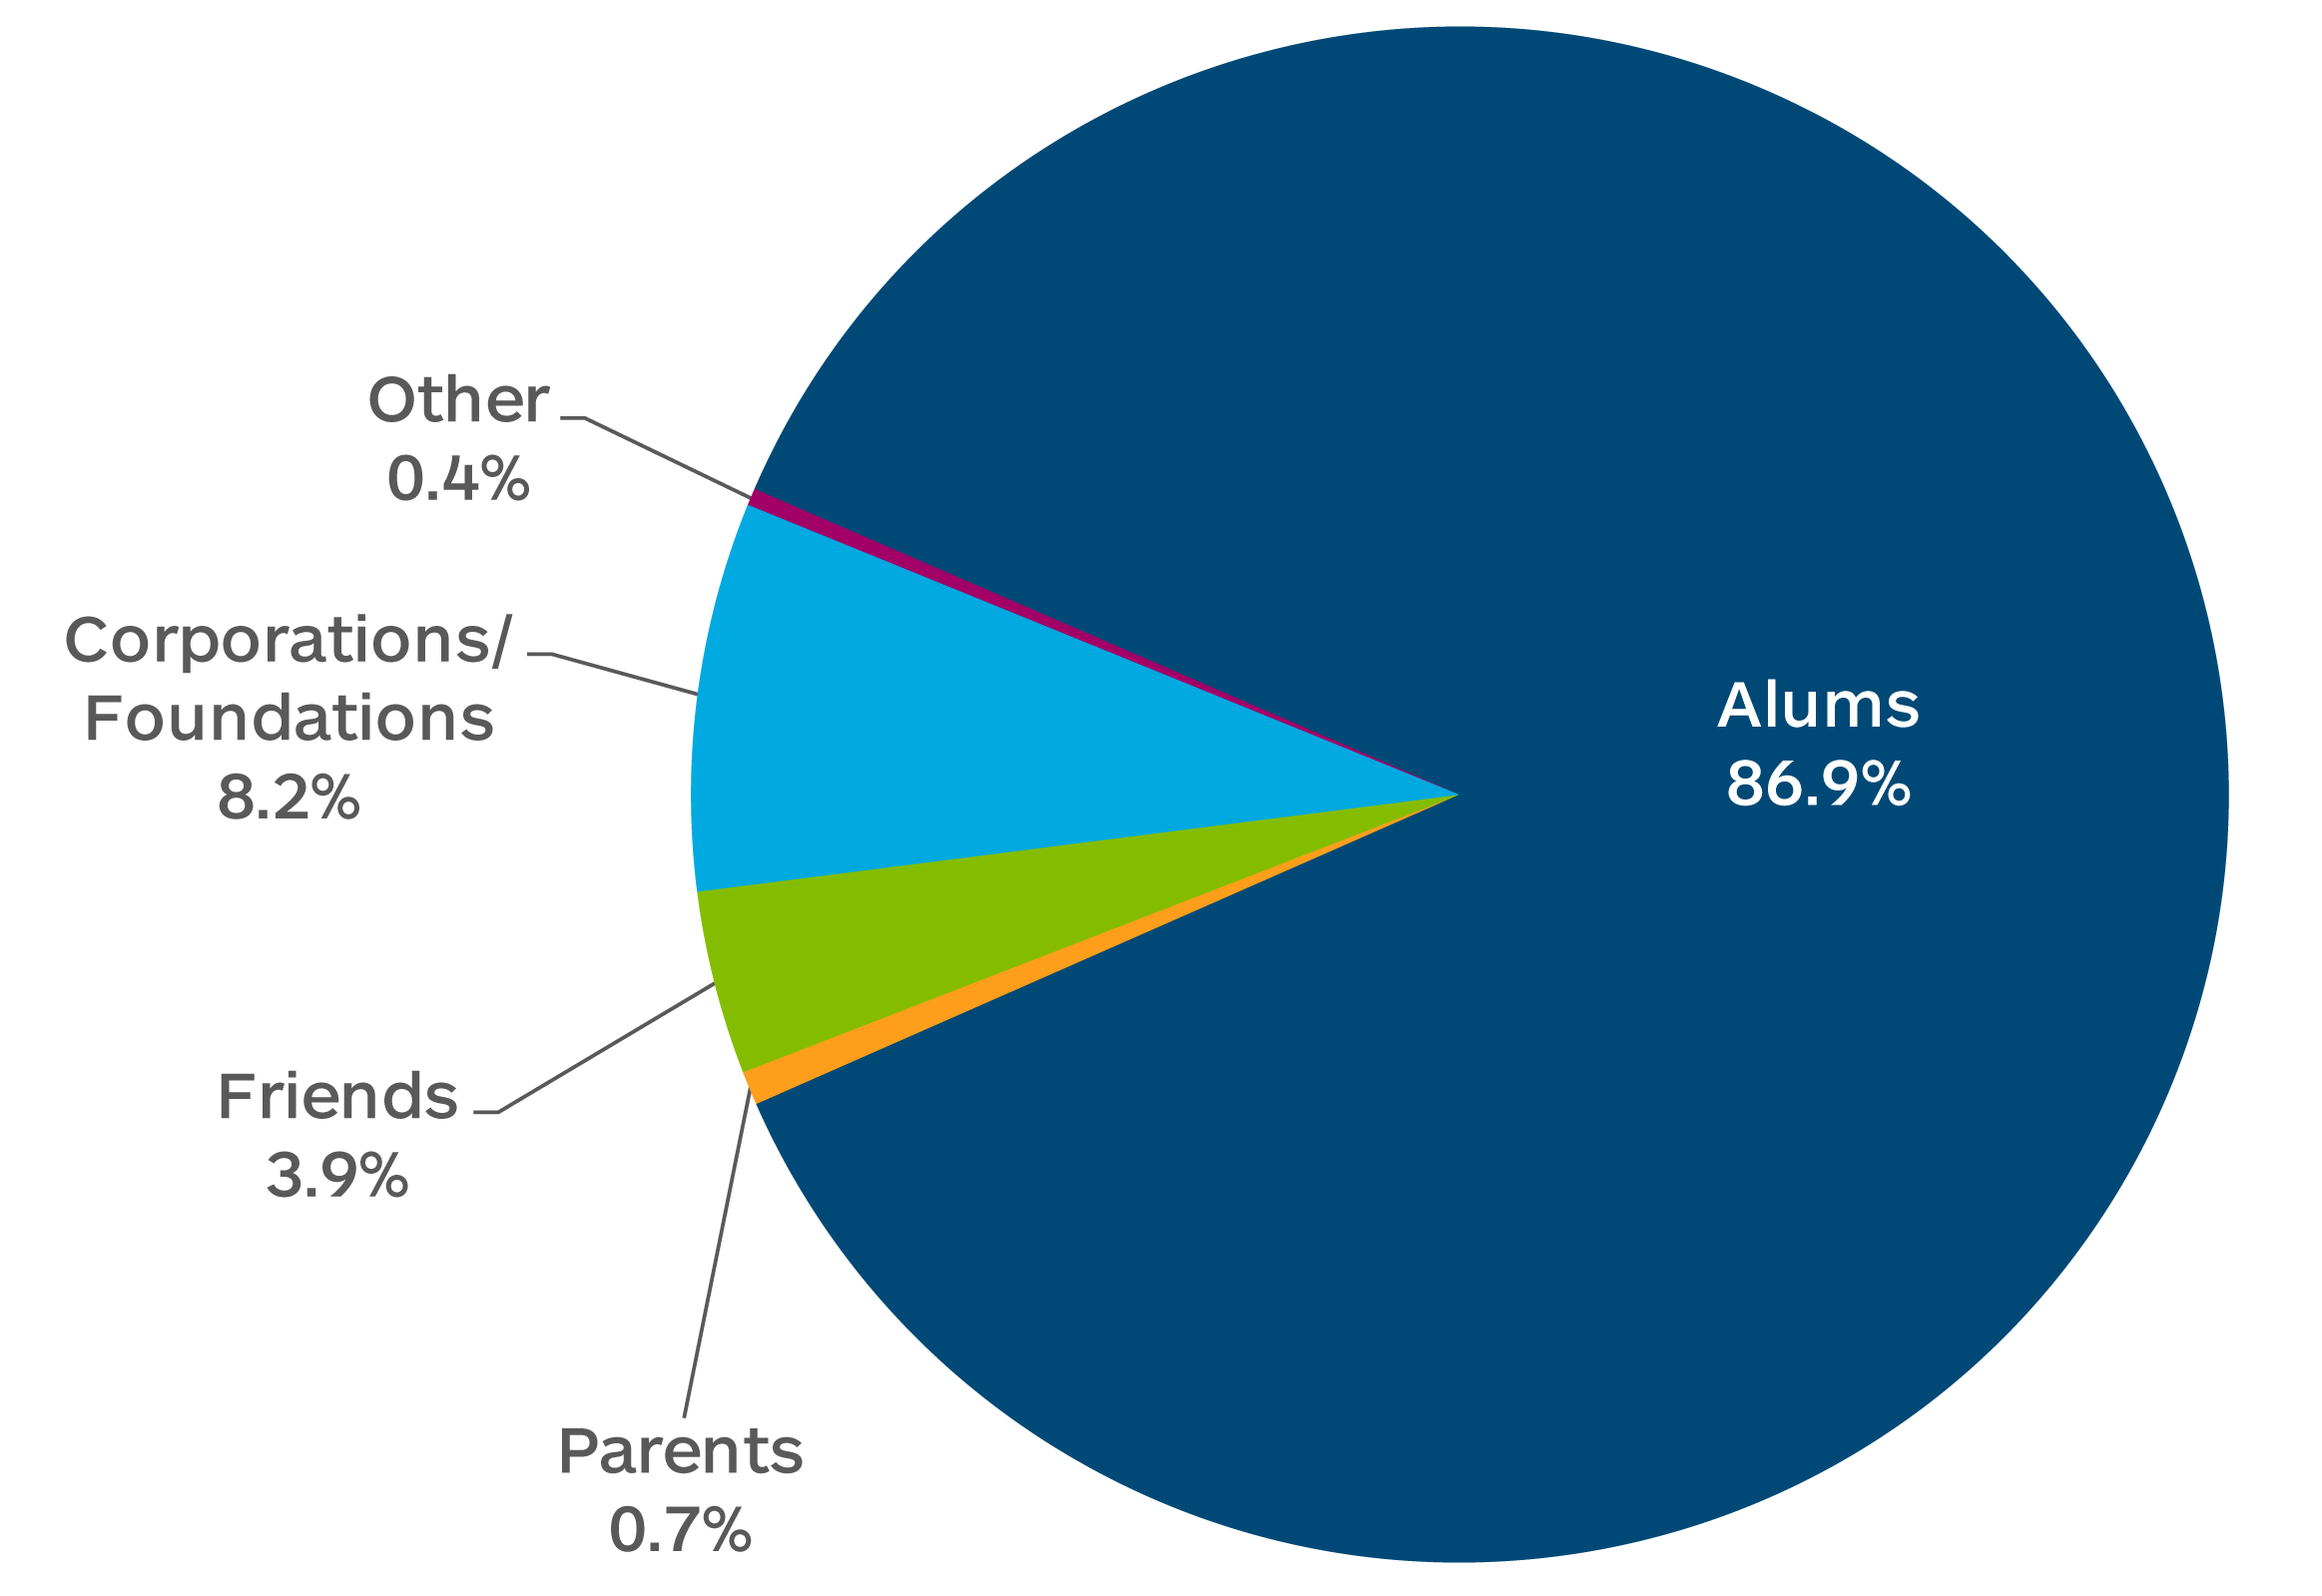 Gift Sources: 86.9% Alums, Corporations/Foundations 8.2%, Friends 3.9%, Parents 0.7%, Other 0.4%